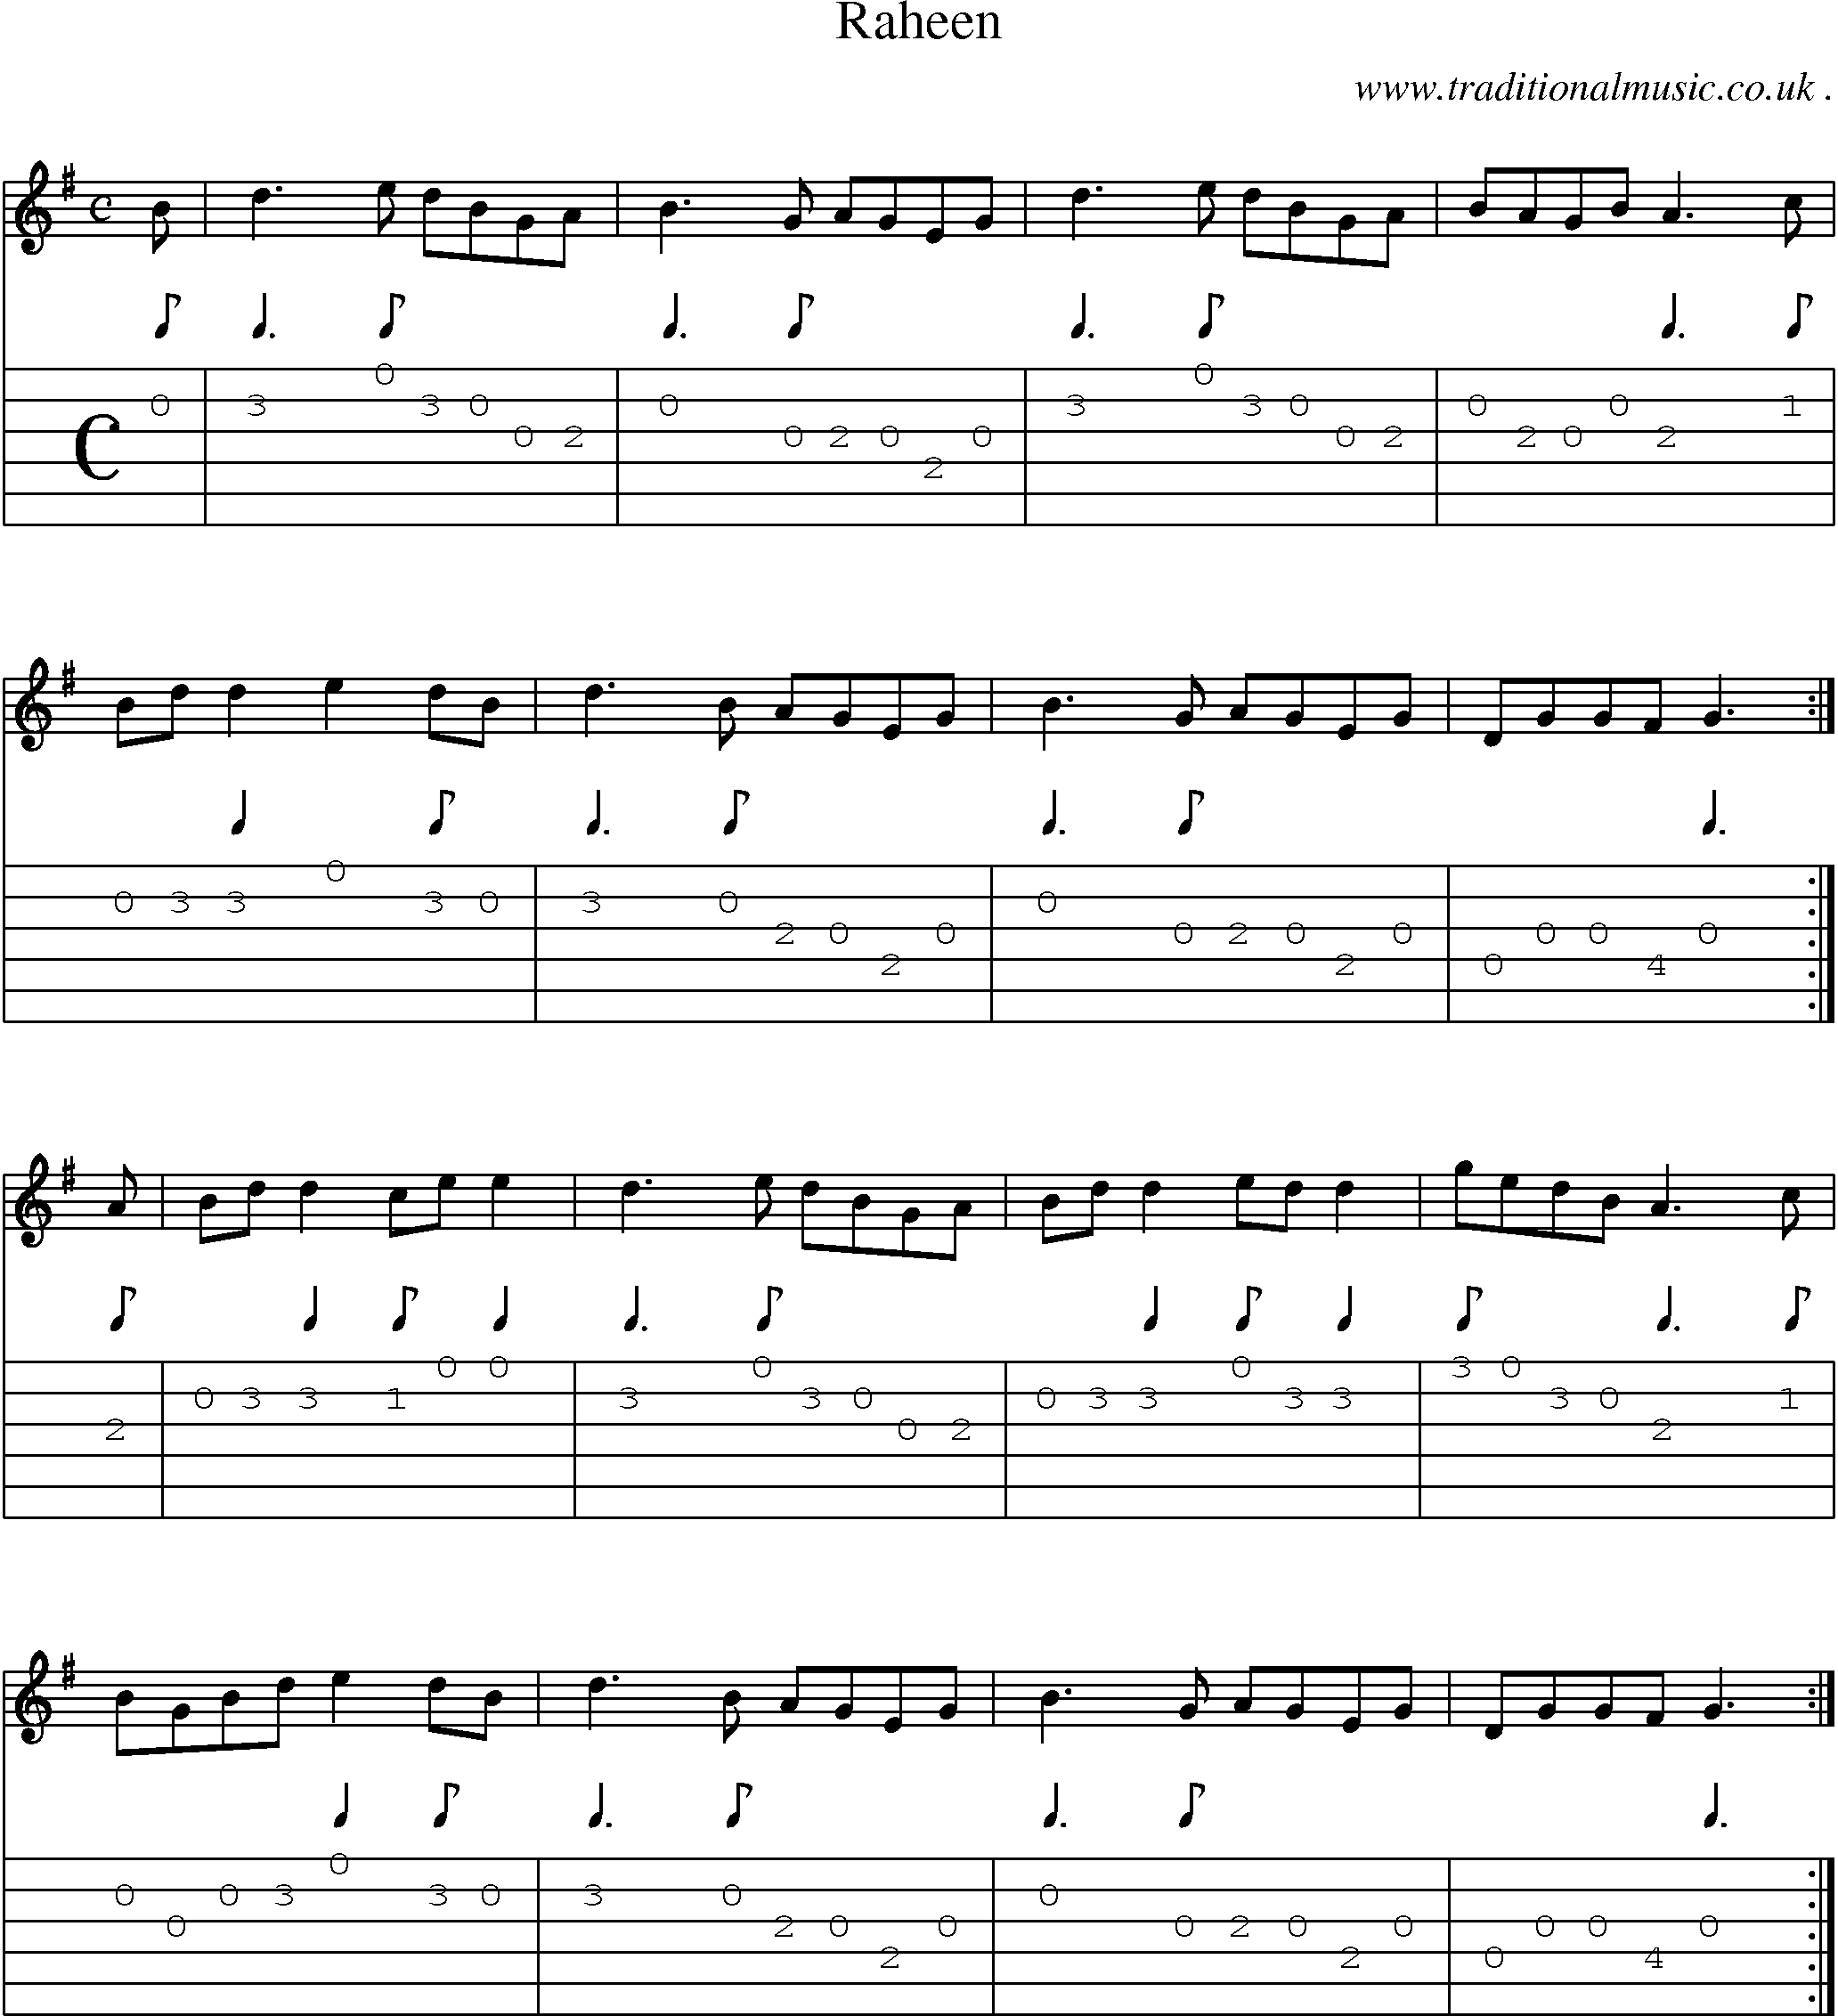 Sheet-Music and Guitar Tabs for Raheen